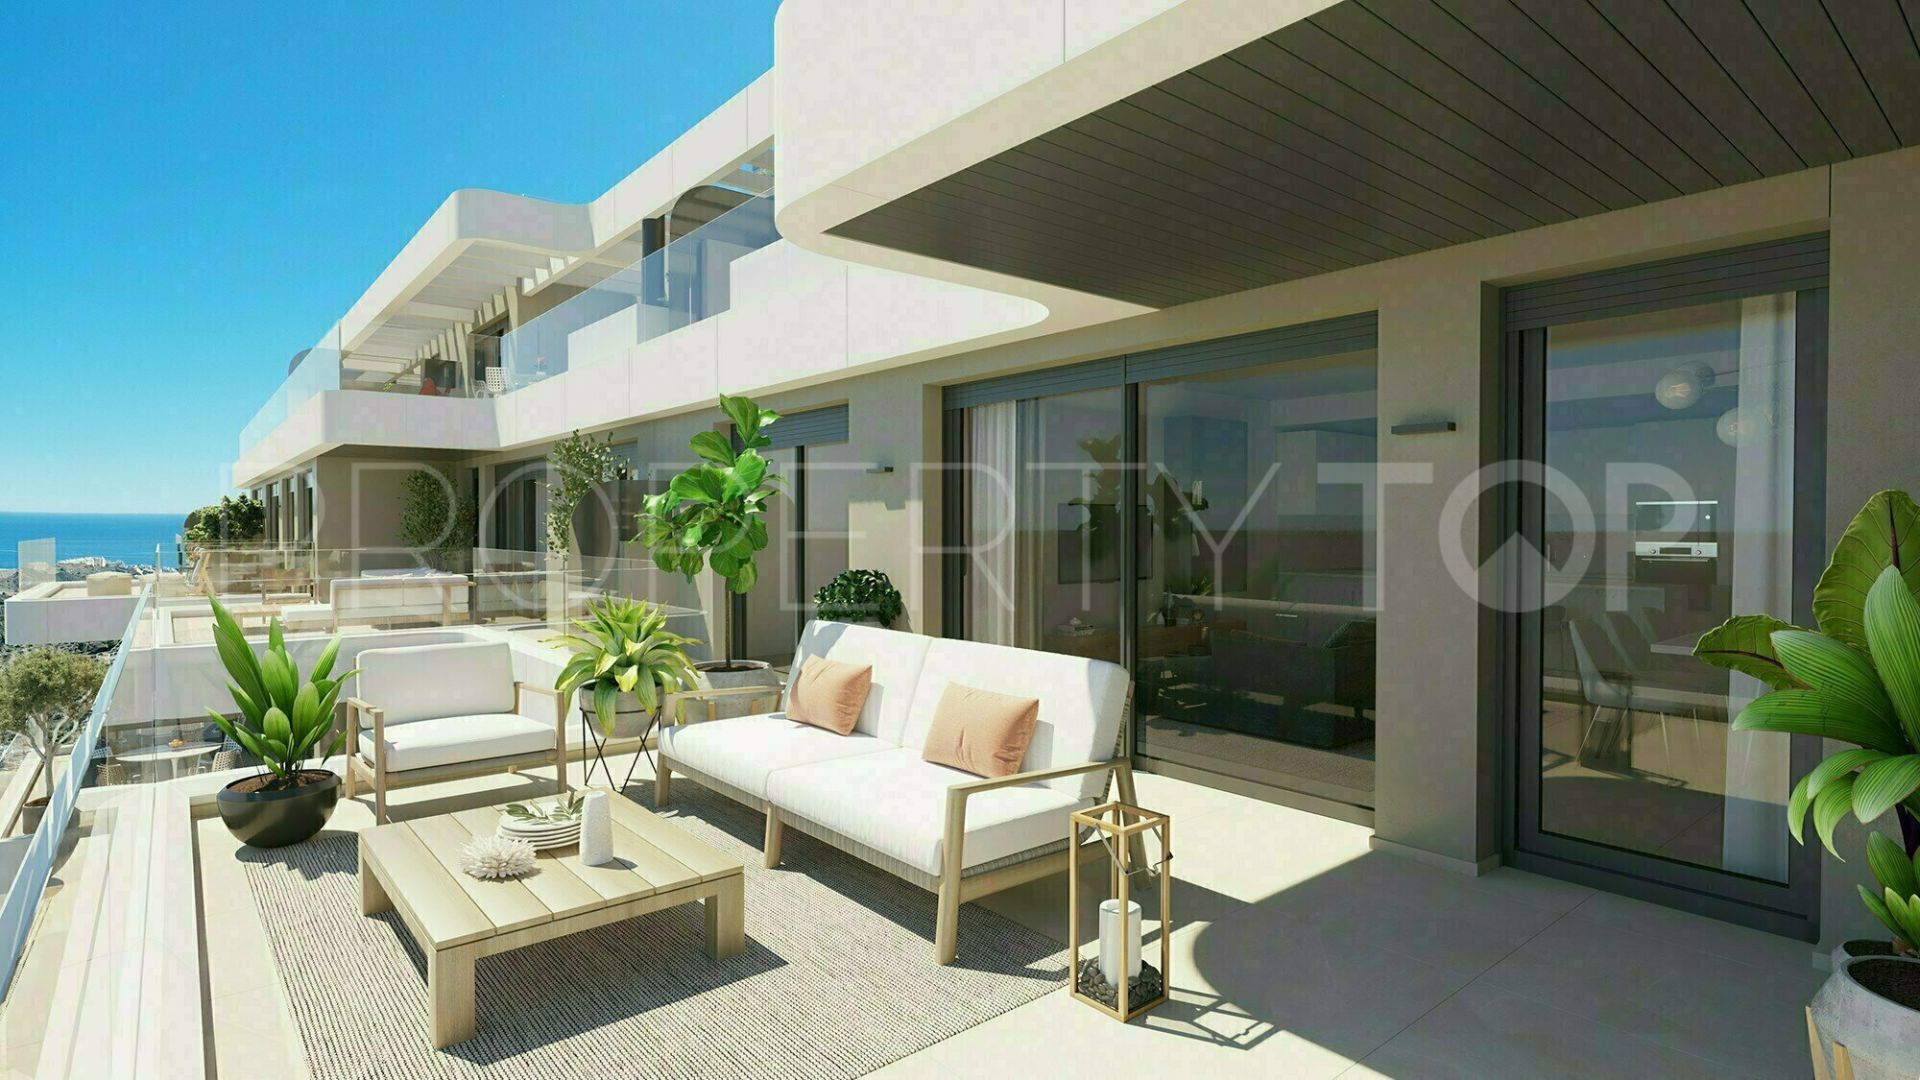 For sale penthouse in Calanova Golf with 2 bedrooms